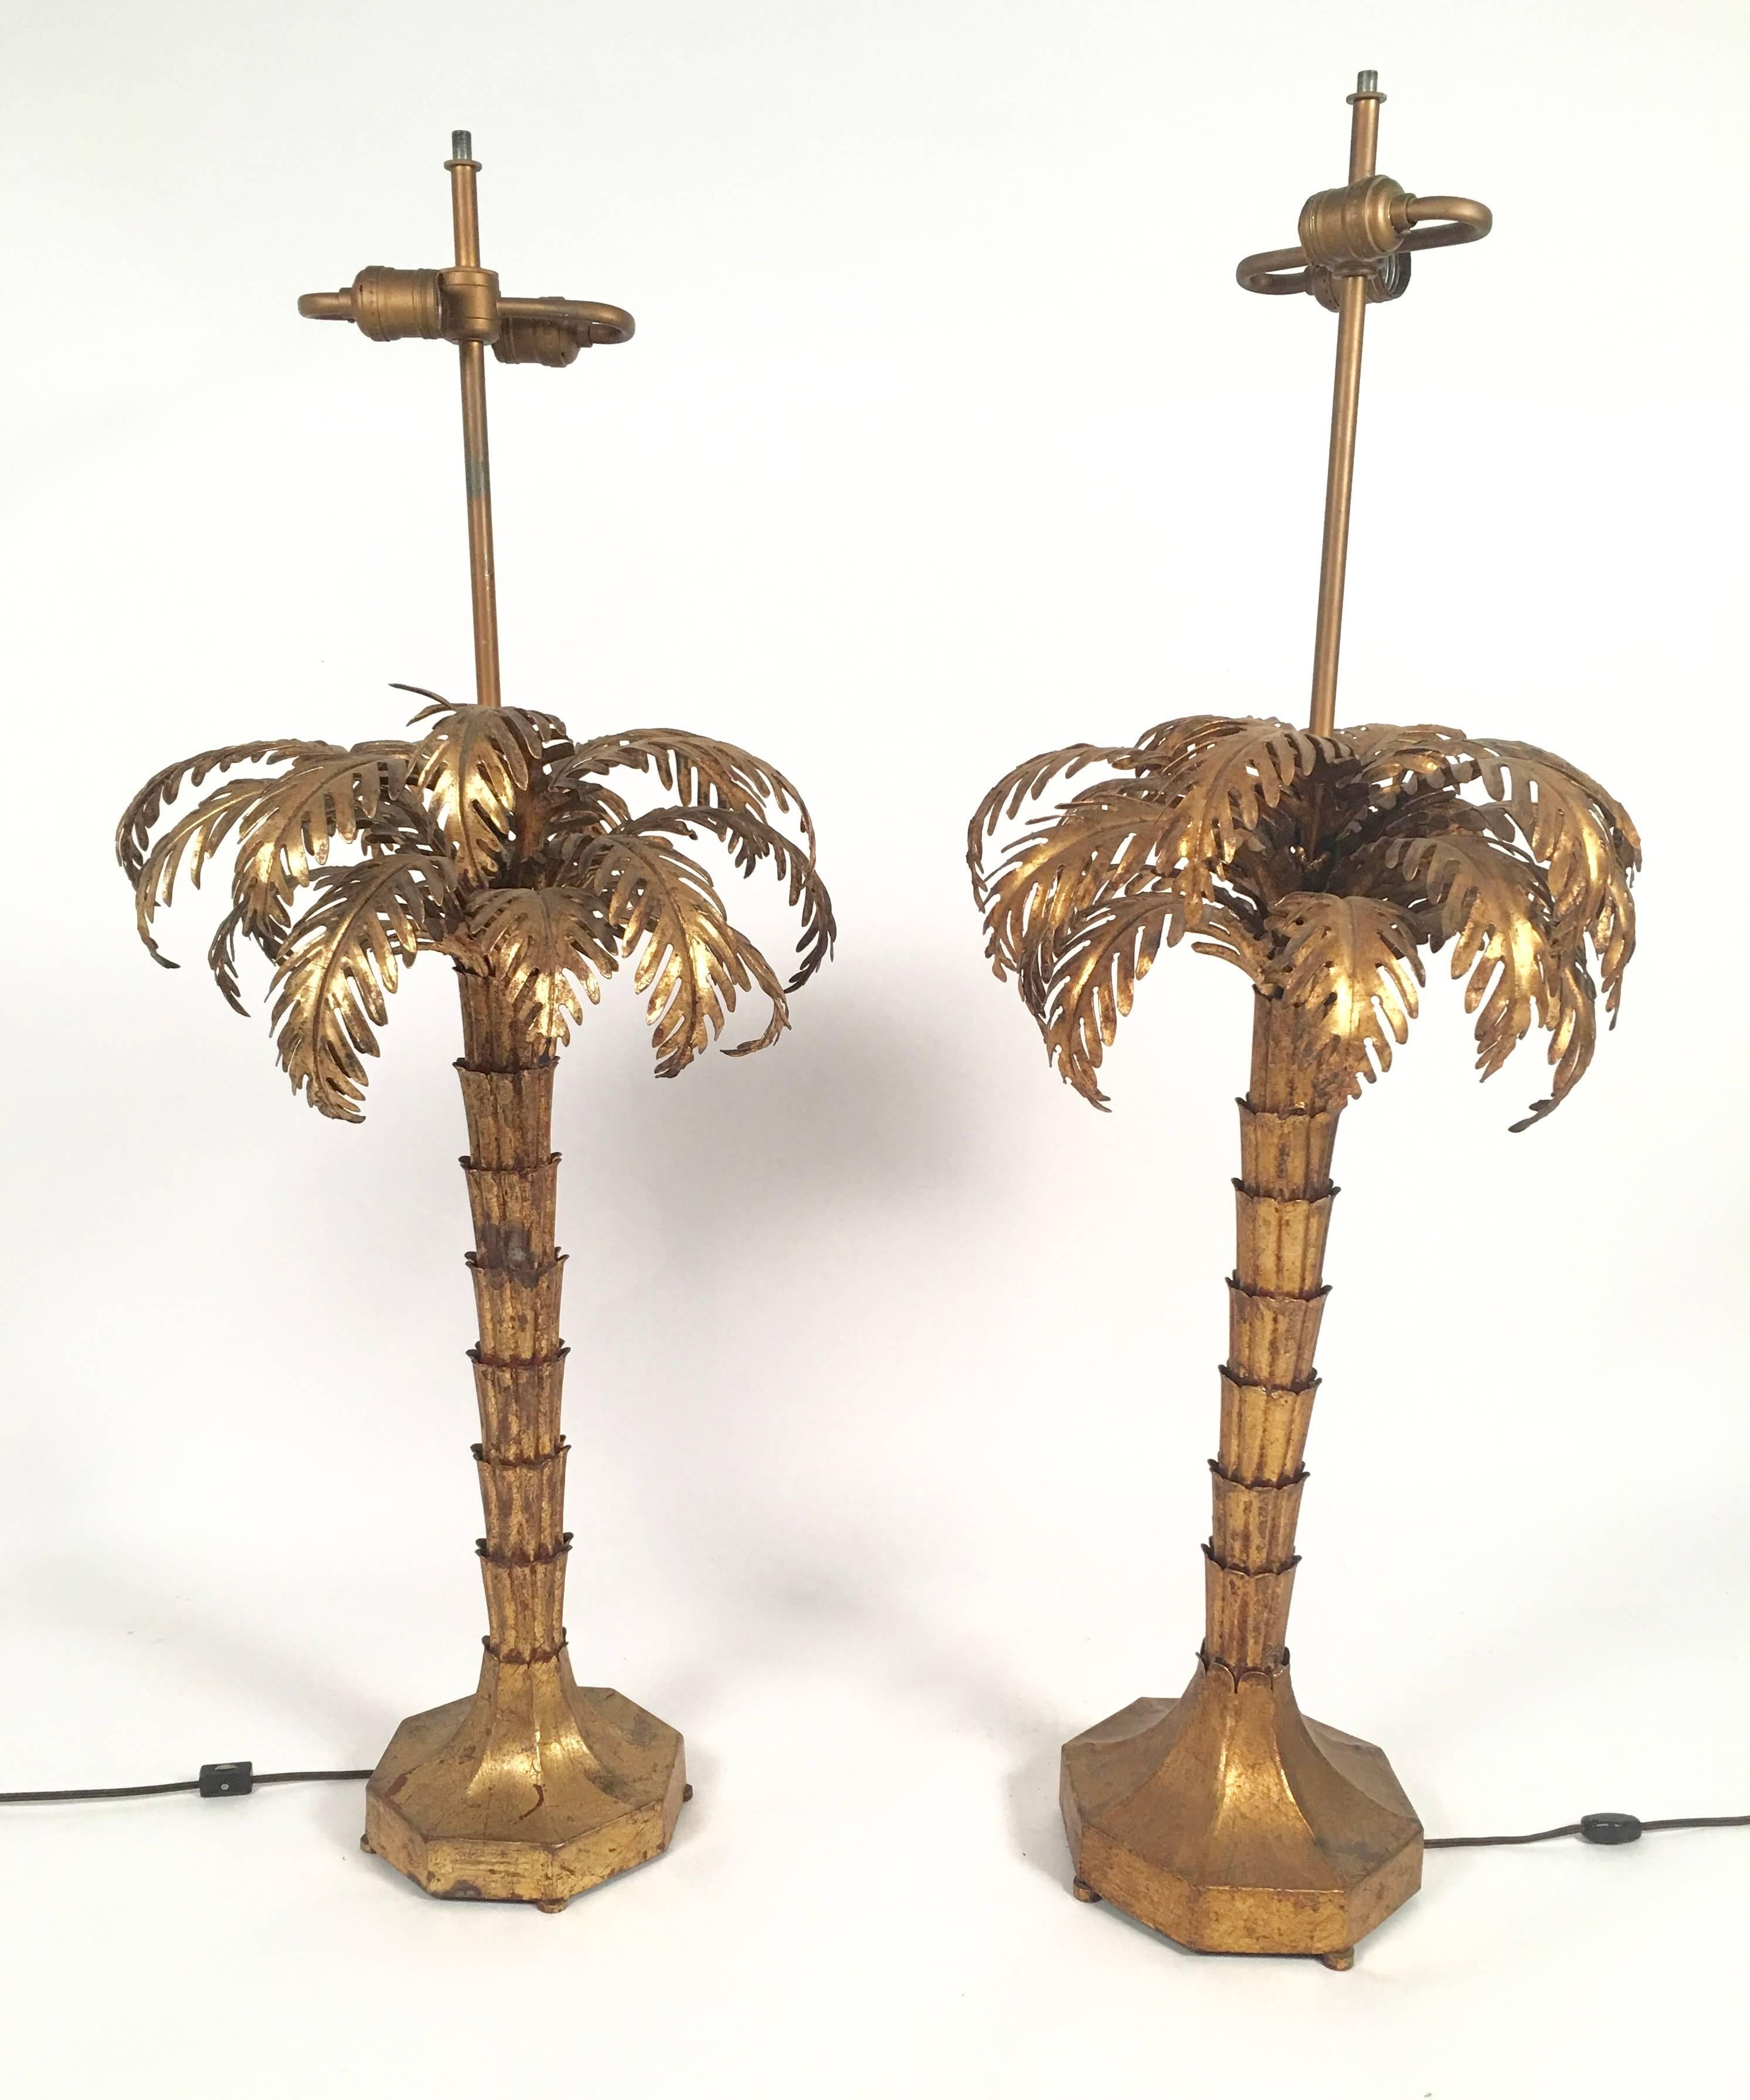 A stylish matched pair (very similar, but not identical) of Mid-Century Italian gilt metal palm tree form lamps, the palm fronds arching over a tapering fluted and segmented trunk on a sloped hexagonal base raised on small ball feet. These lamps are